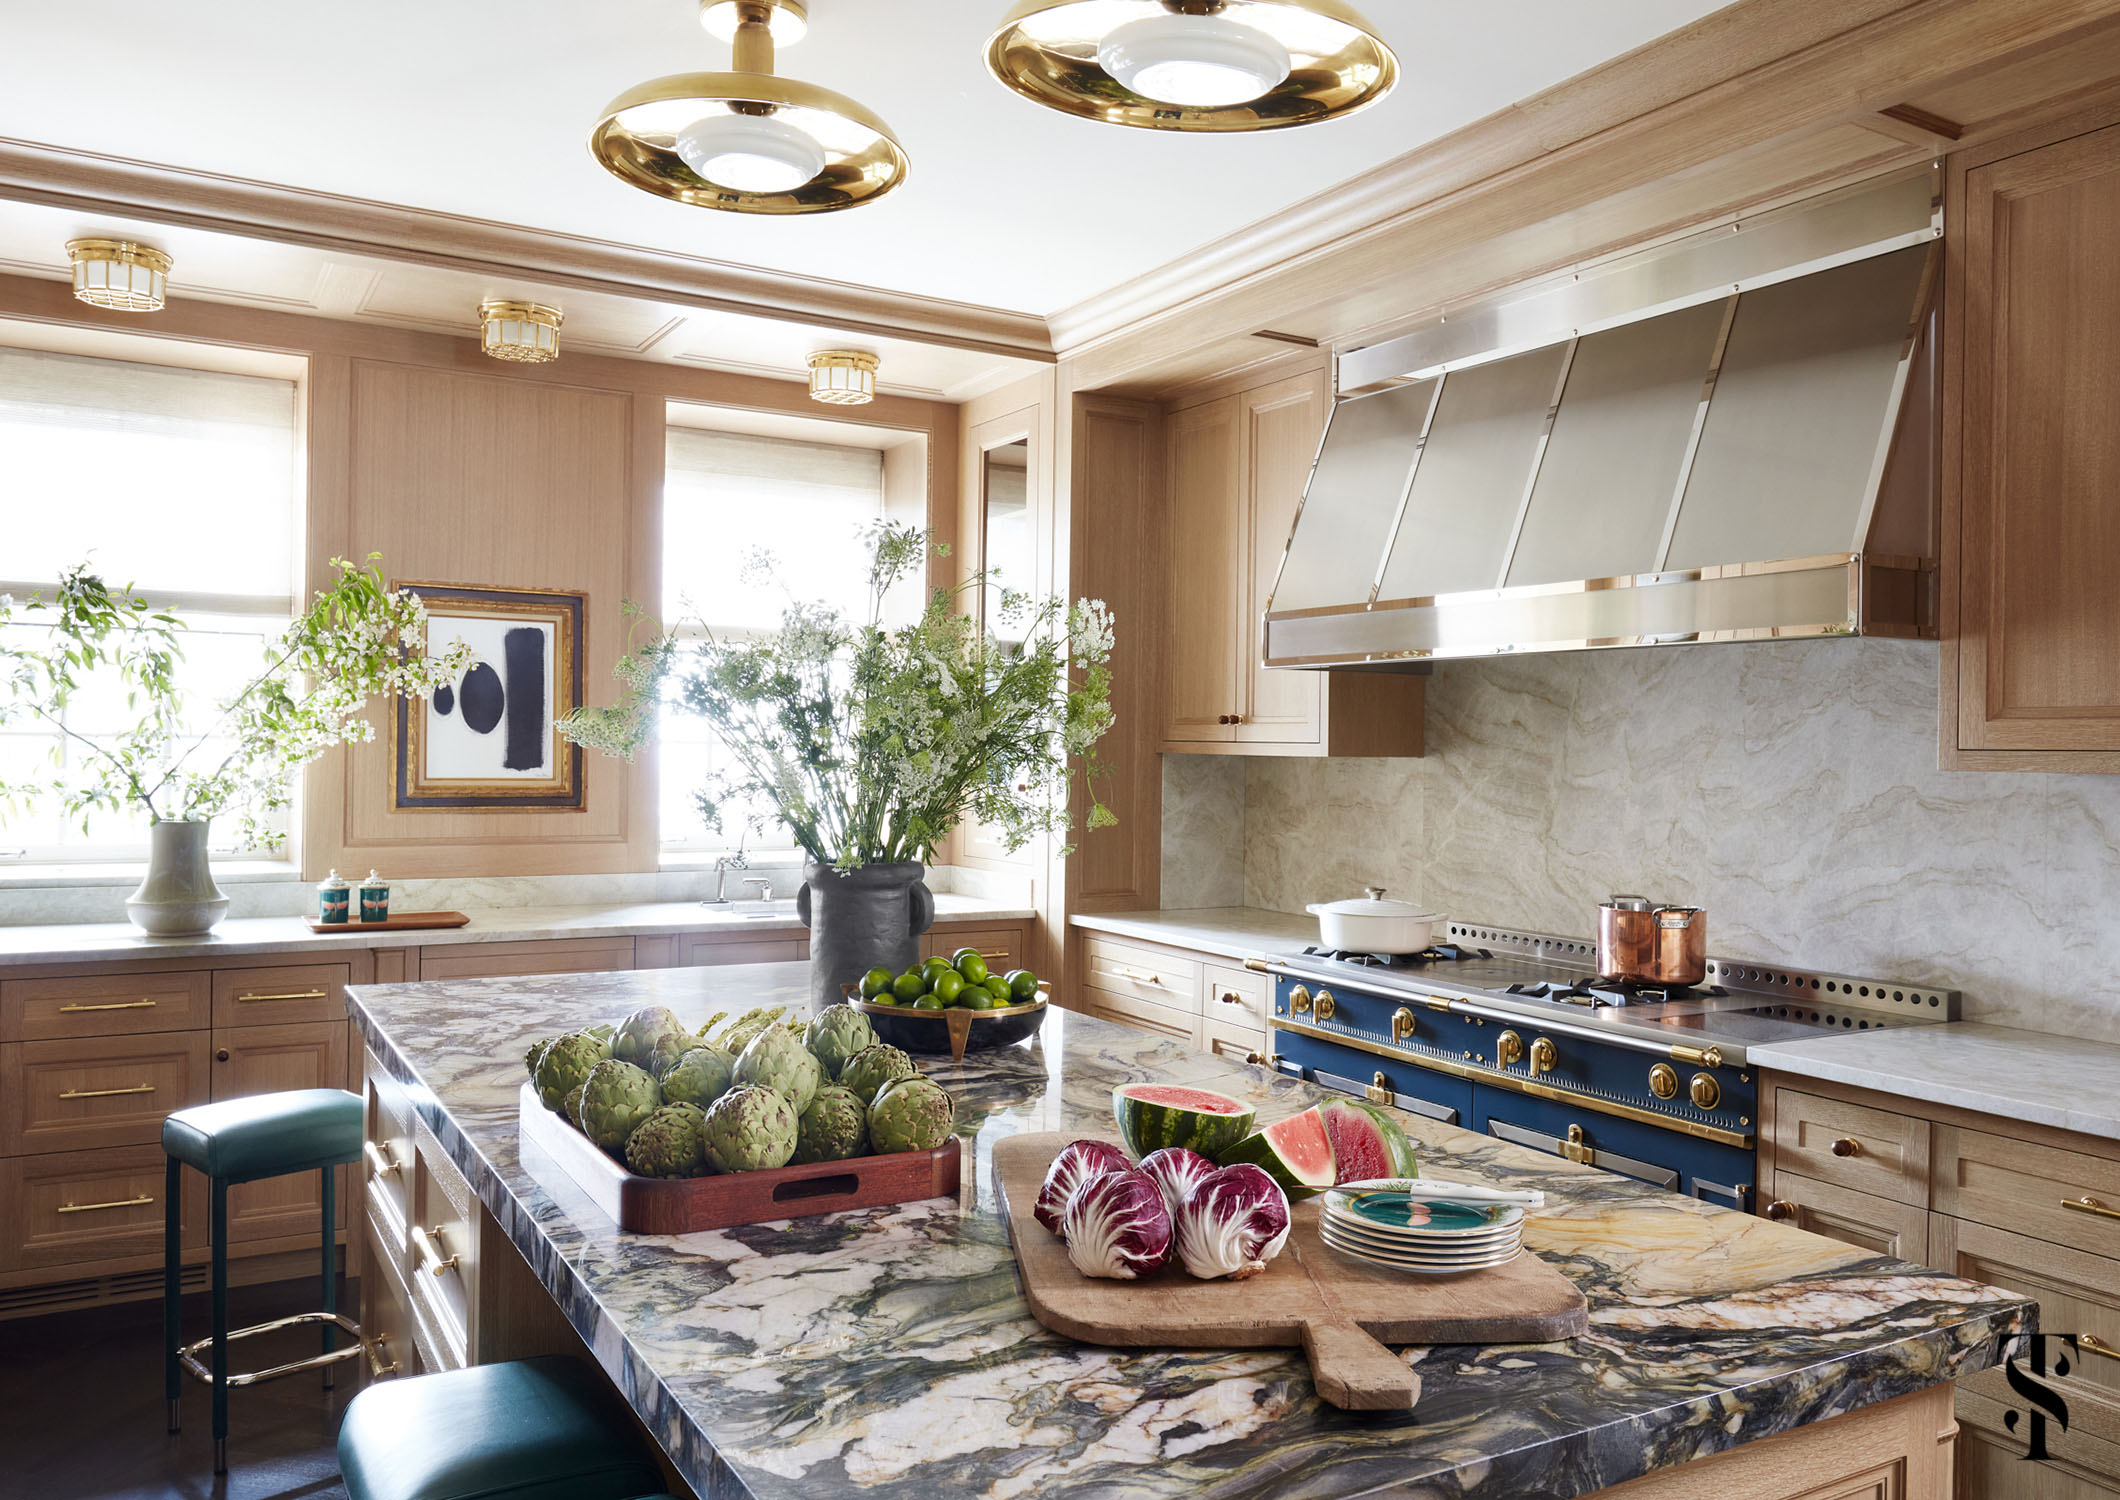 This moody kitchen features a La Cornue range, Crillon stools by Soane, ceiling flush mounts by Roman and Williams Guild, and explosion marble on the island.